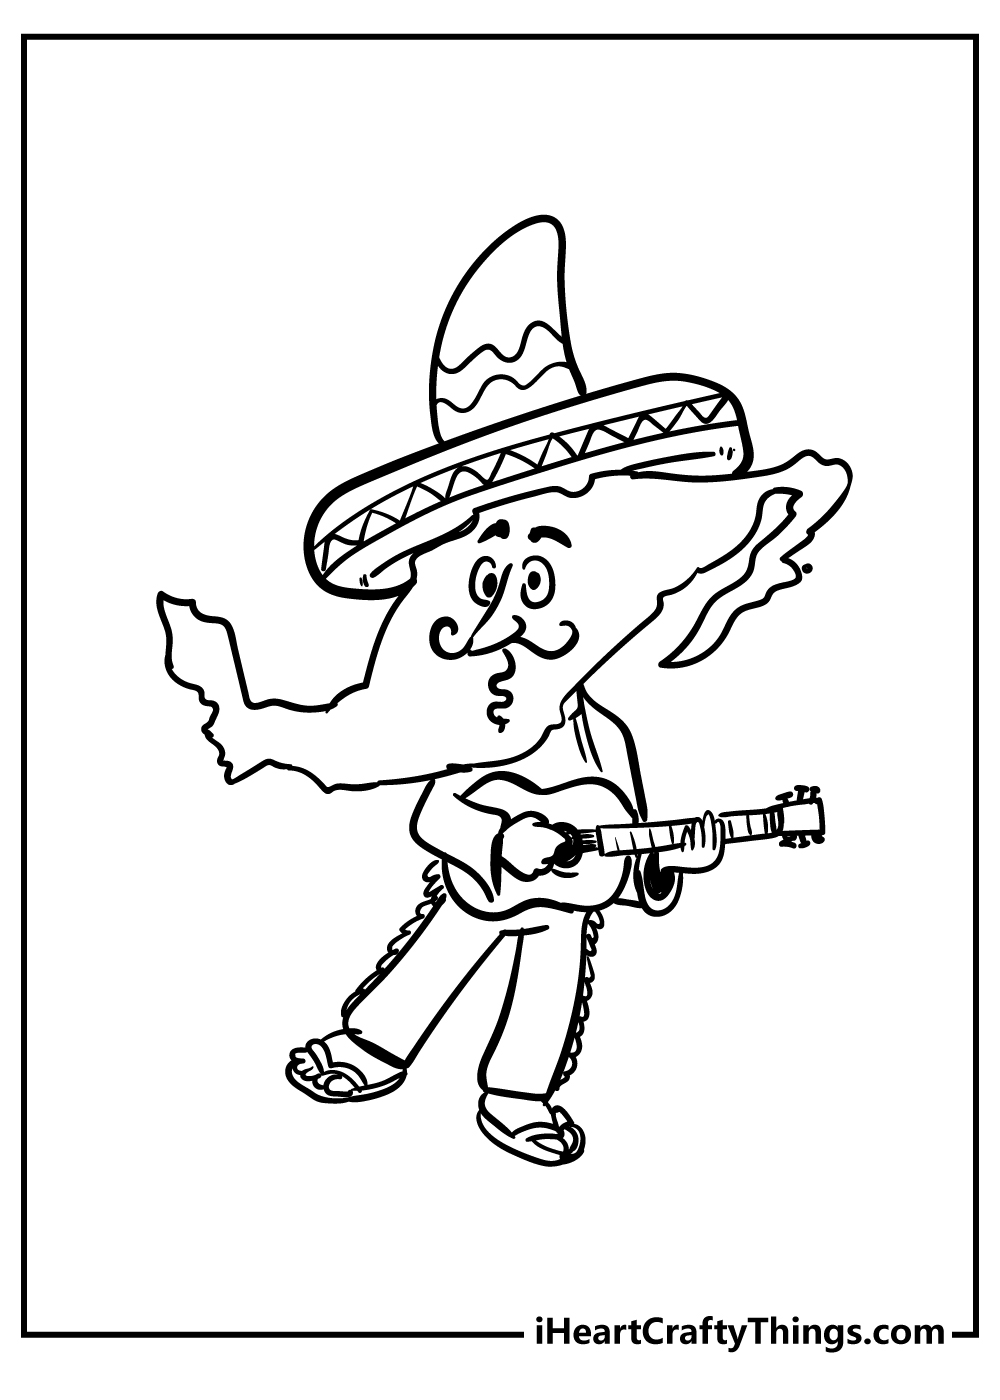 Mexican Coloring Pages for kids free download